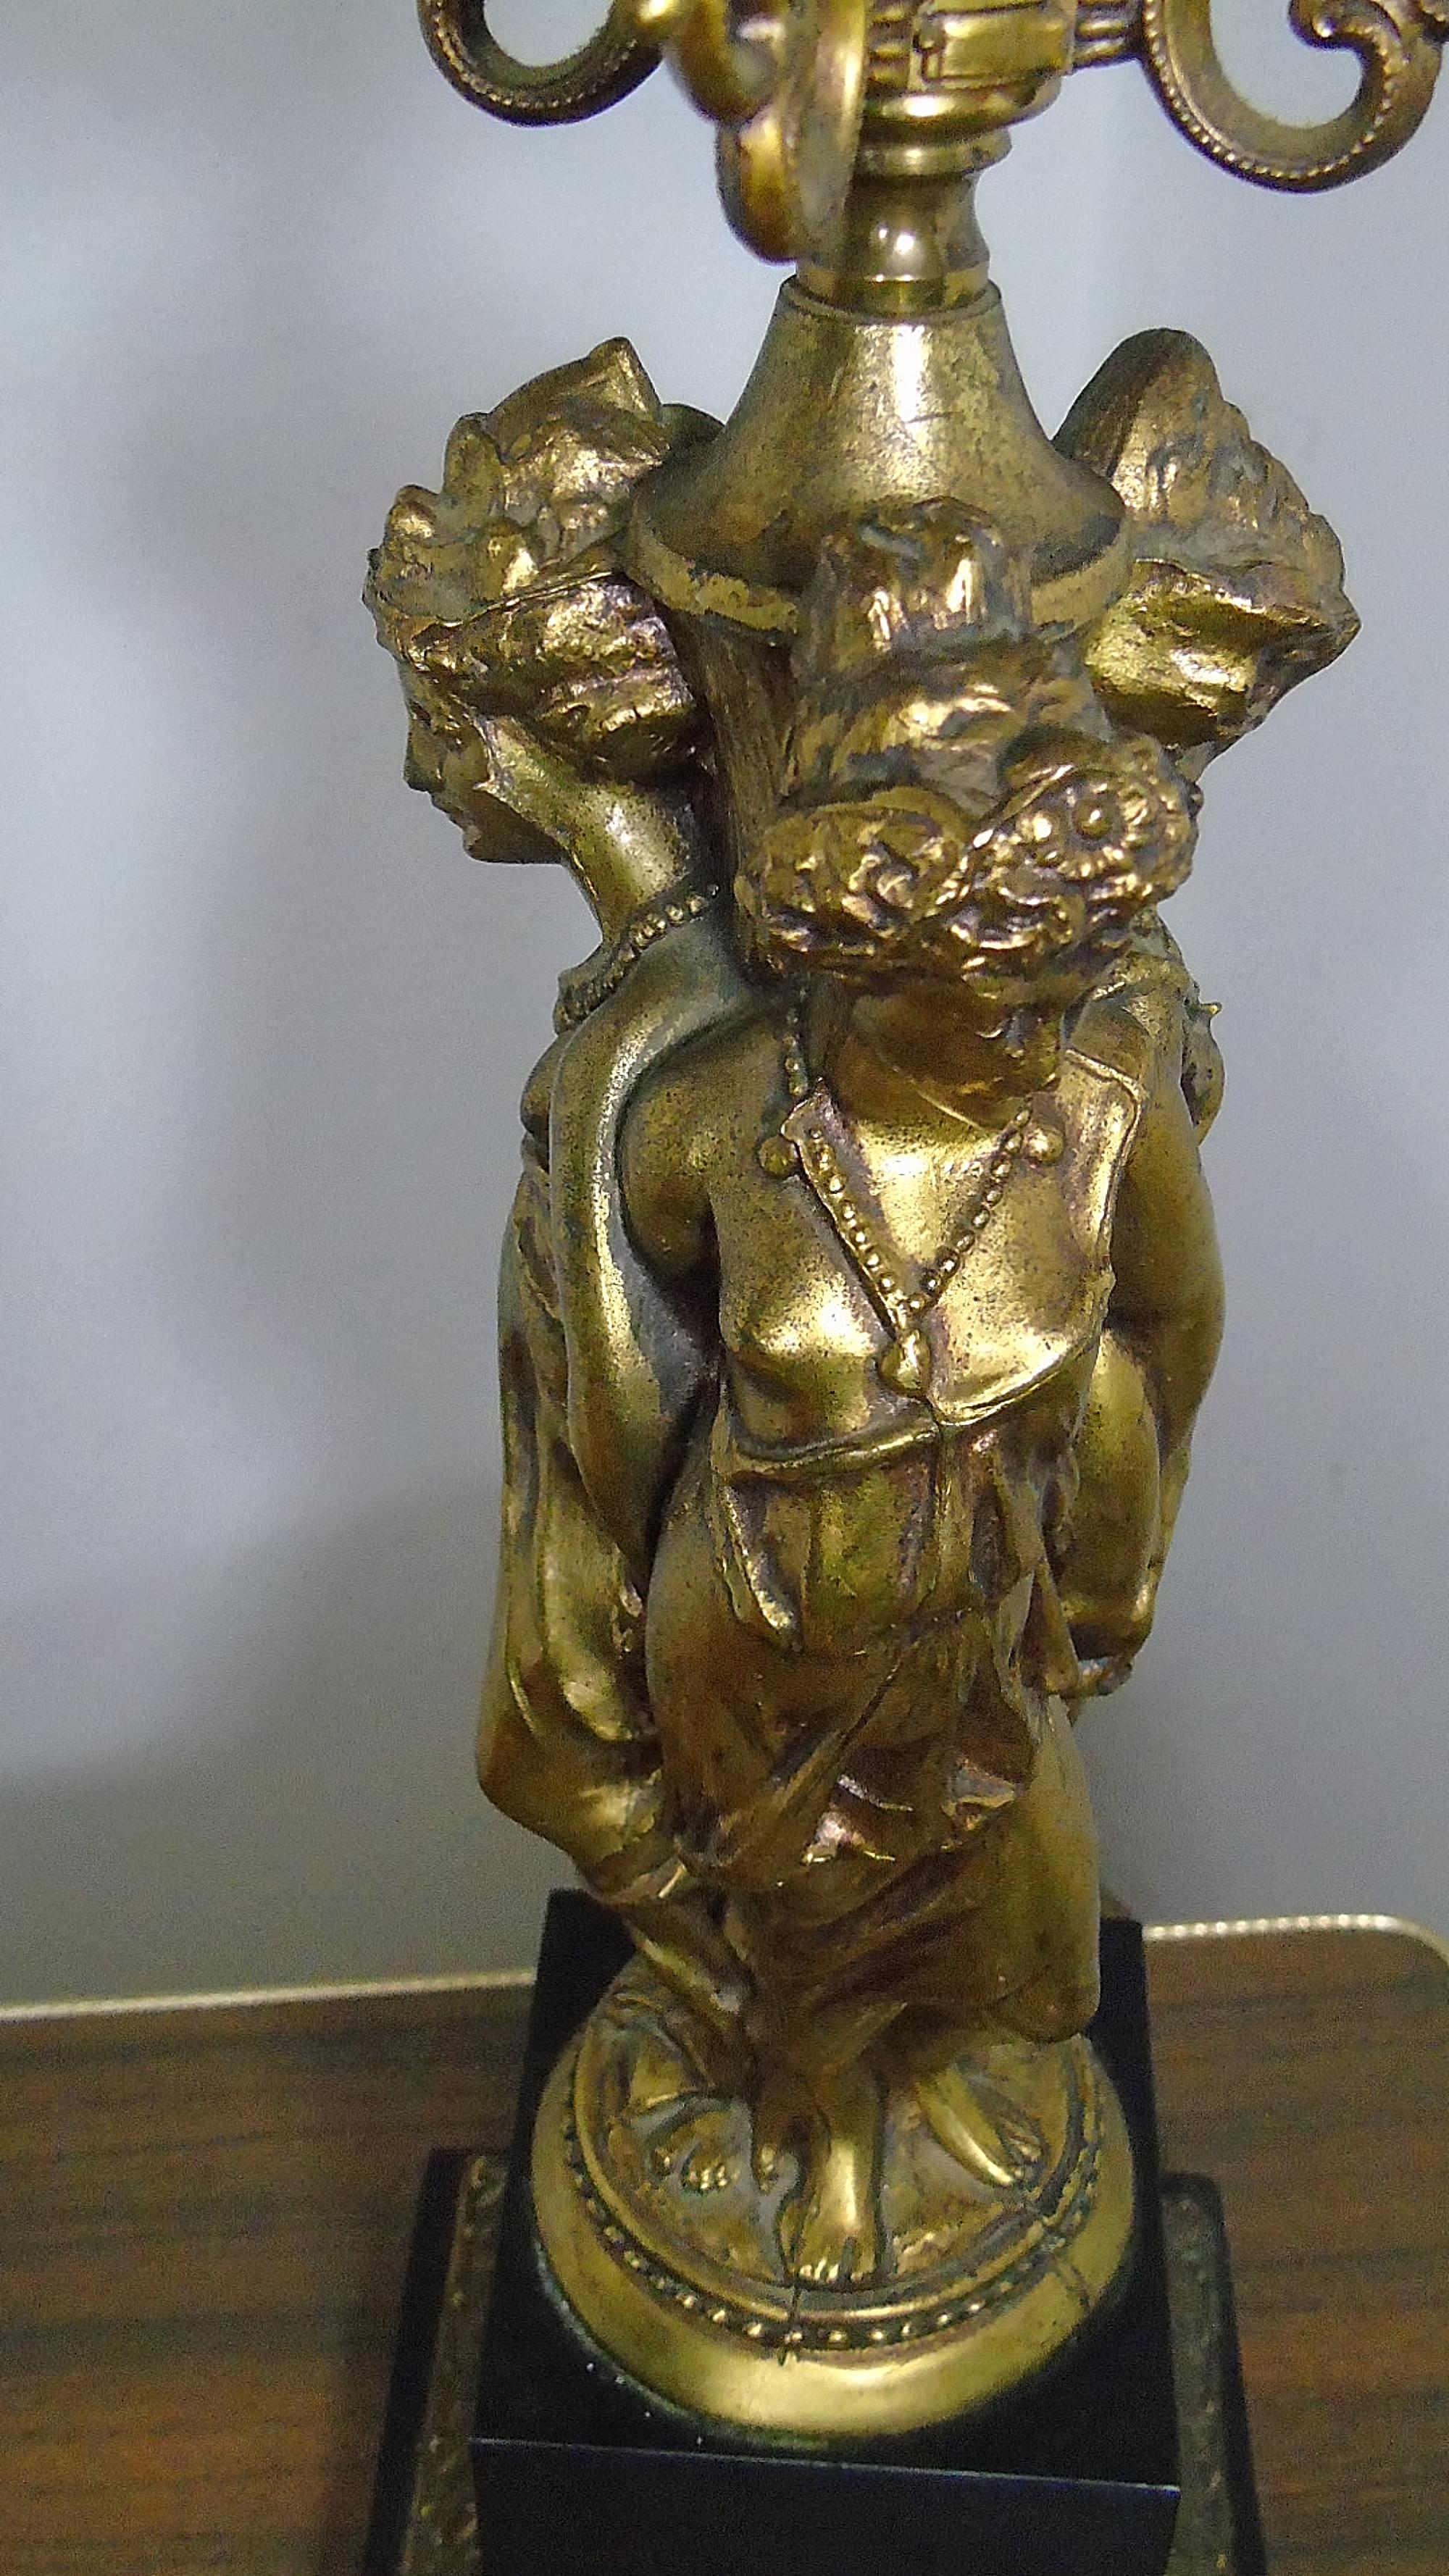 Huge Gilt Metal Empire Style Table Lamps, set of two 1960s (Vergoldet)